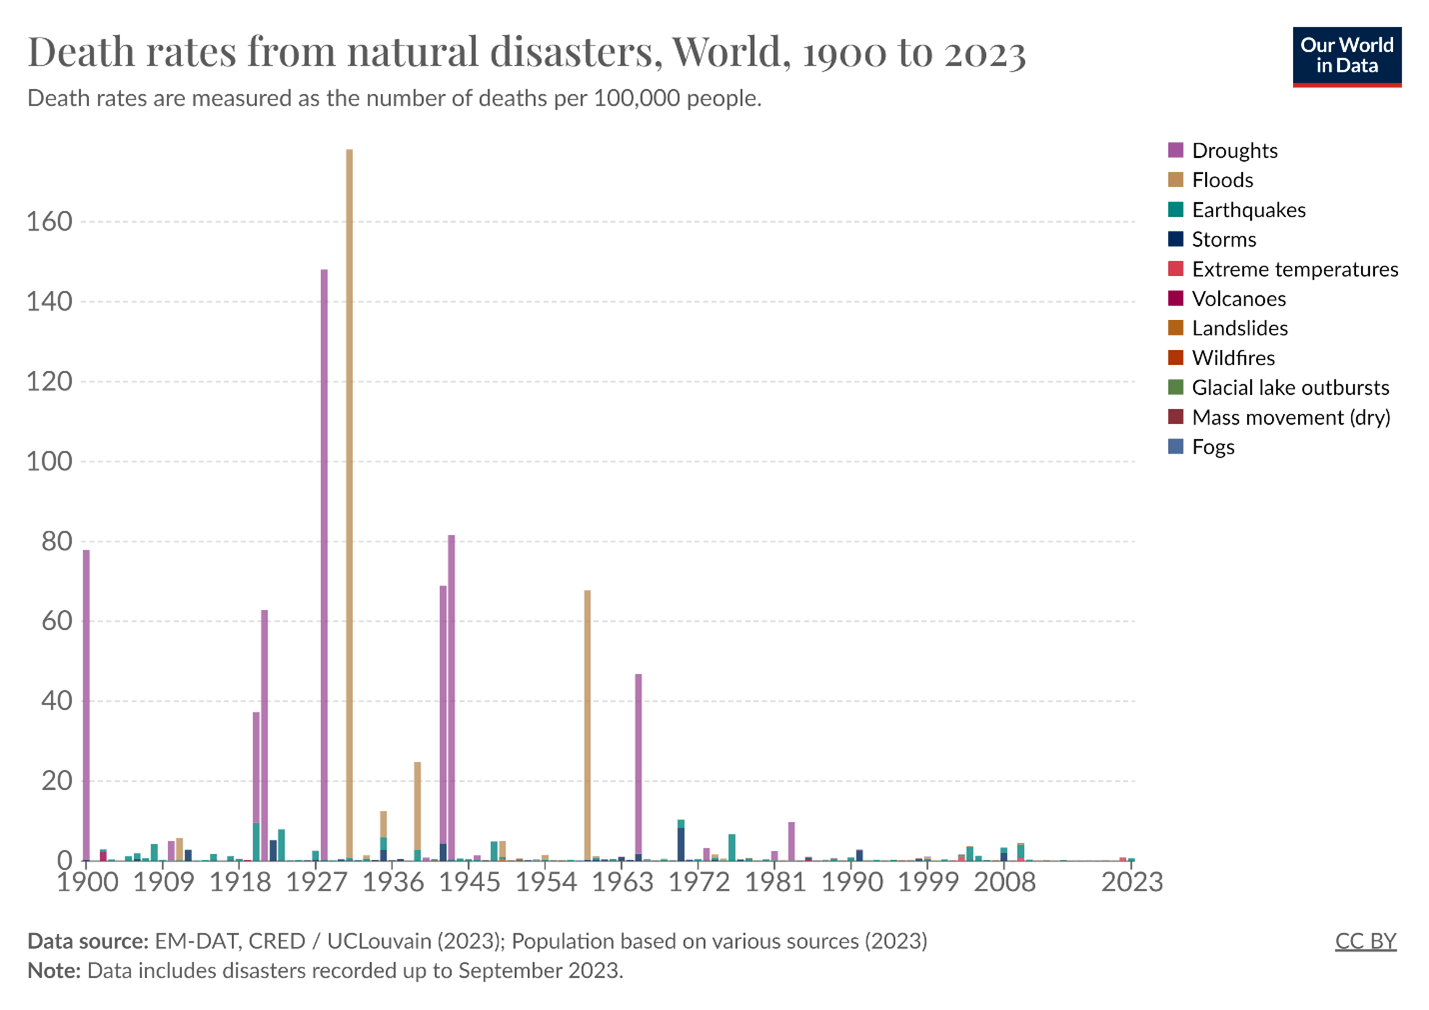 A graph showing the number of deaths per 100,000 people due to different types of natural disasters over time.